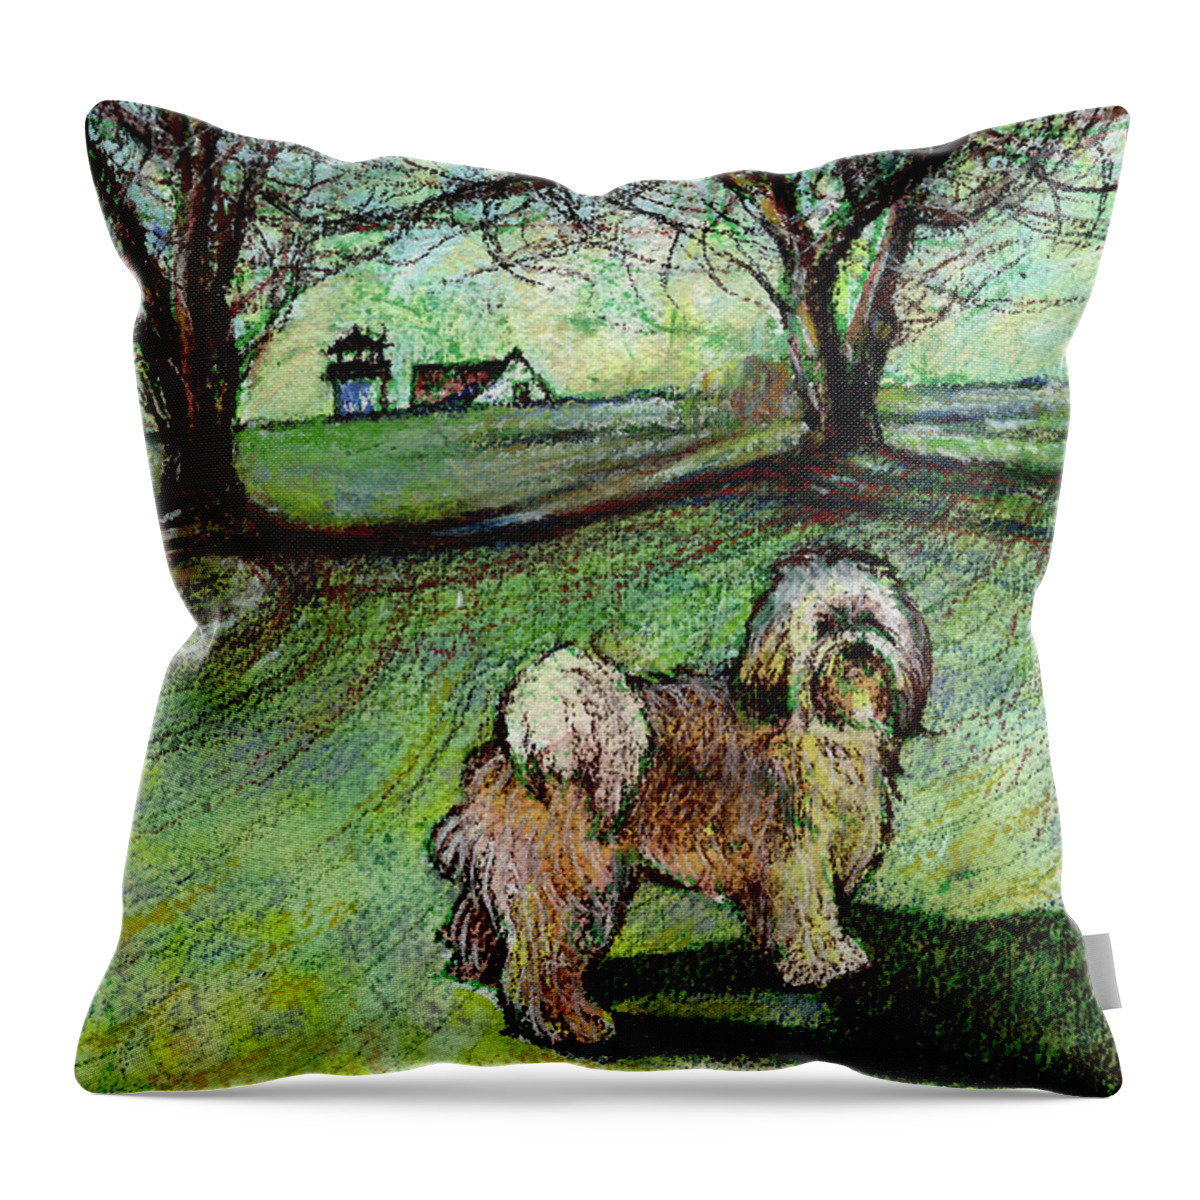 Apple Trees Throw Pillow featuring the mixed media Apple Trees by AnneMarie Welsh